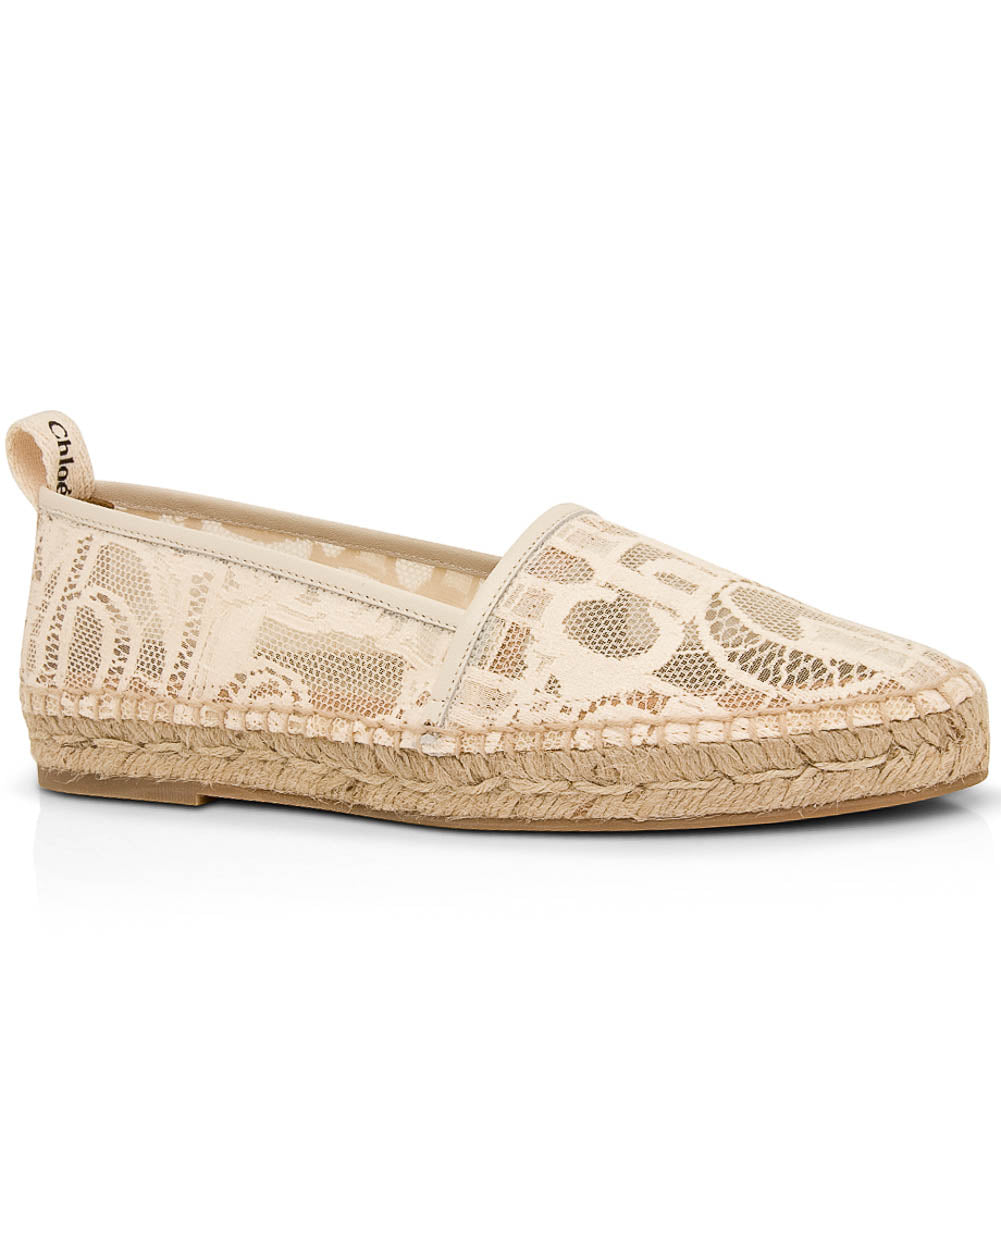 Woody Espadrille in Lace